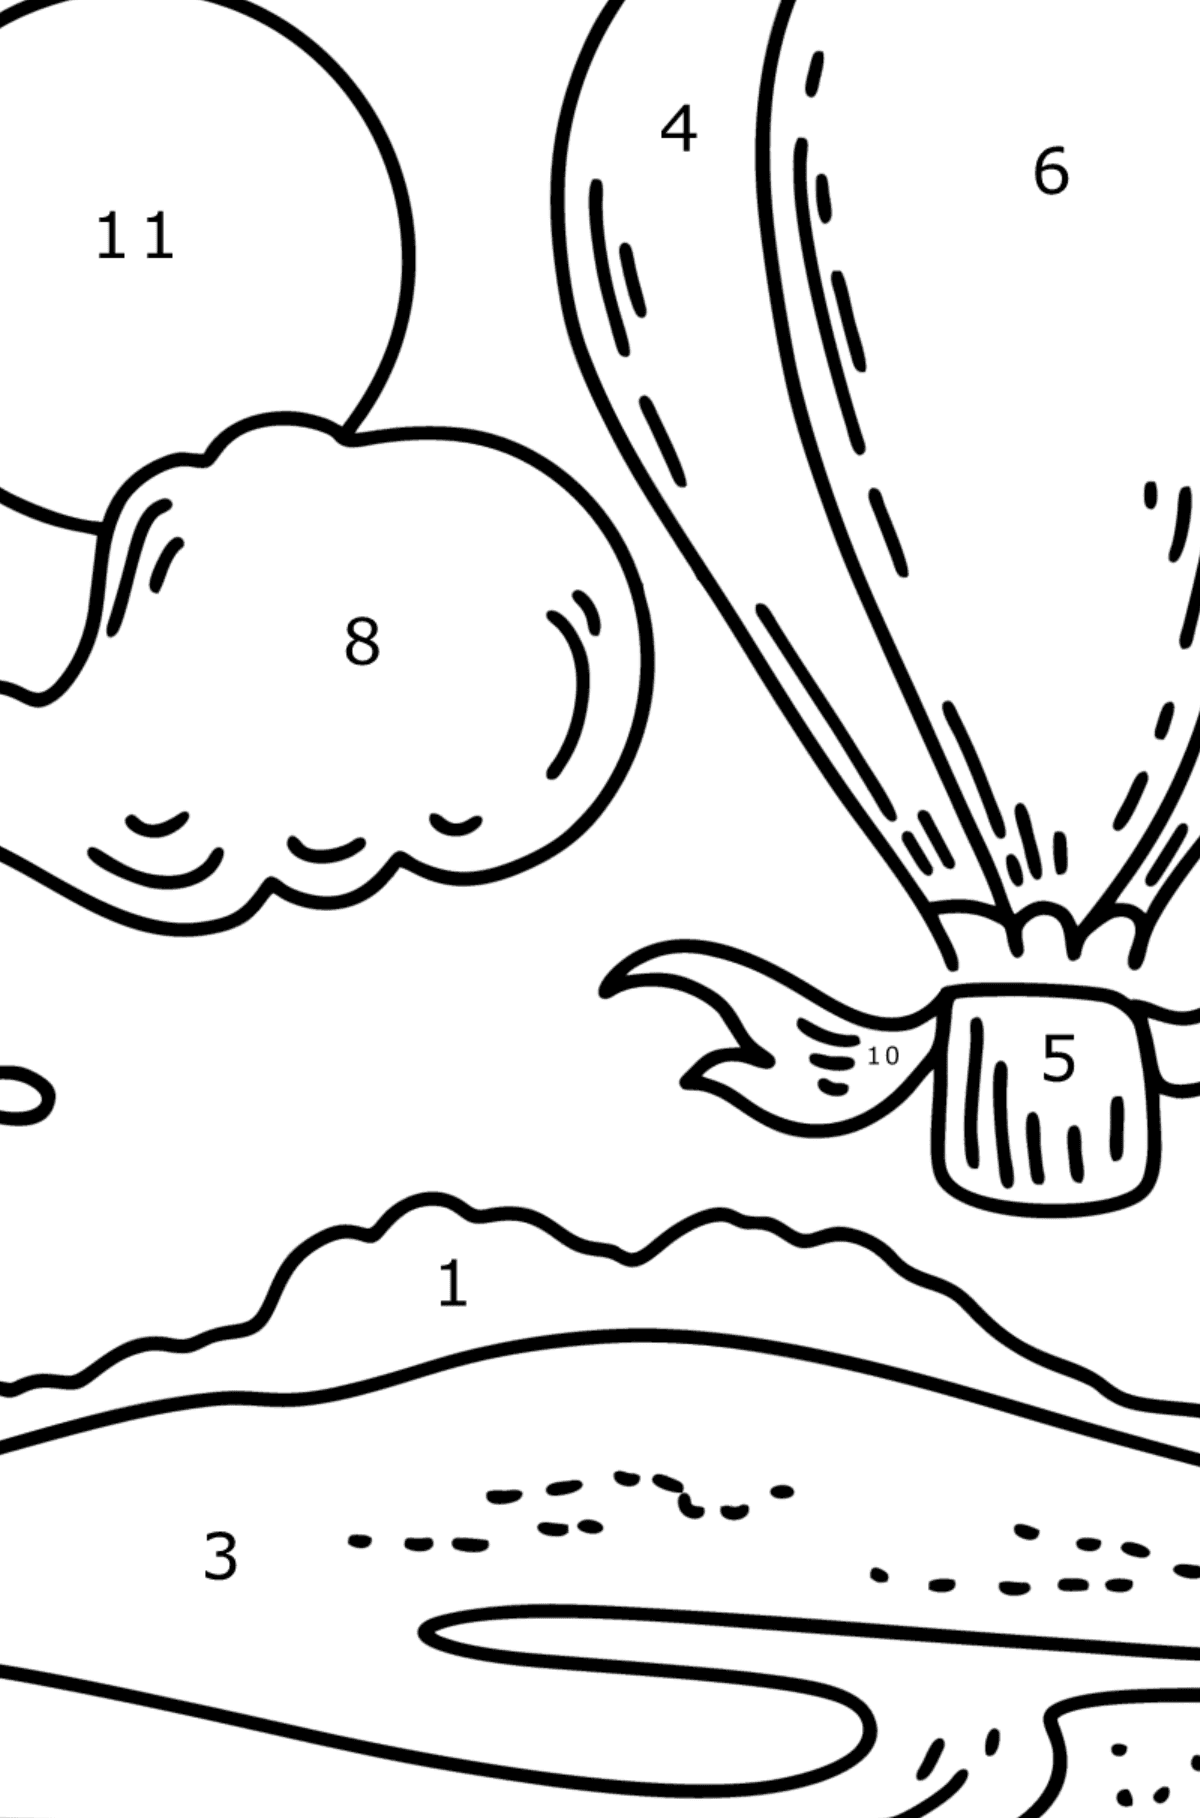 Coloring page - hot air balloon - Coloring by Numbers for Kids